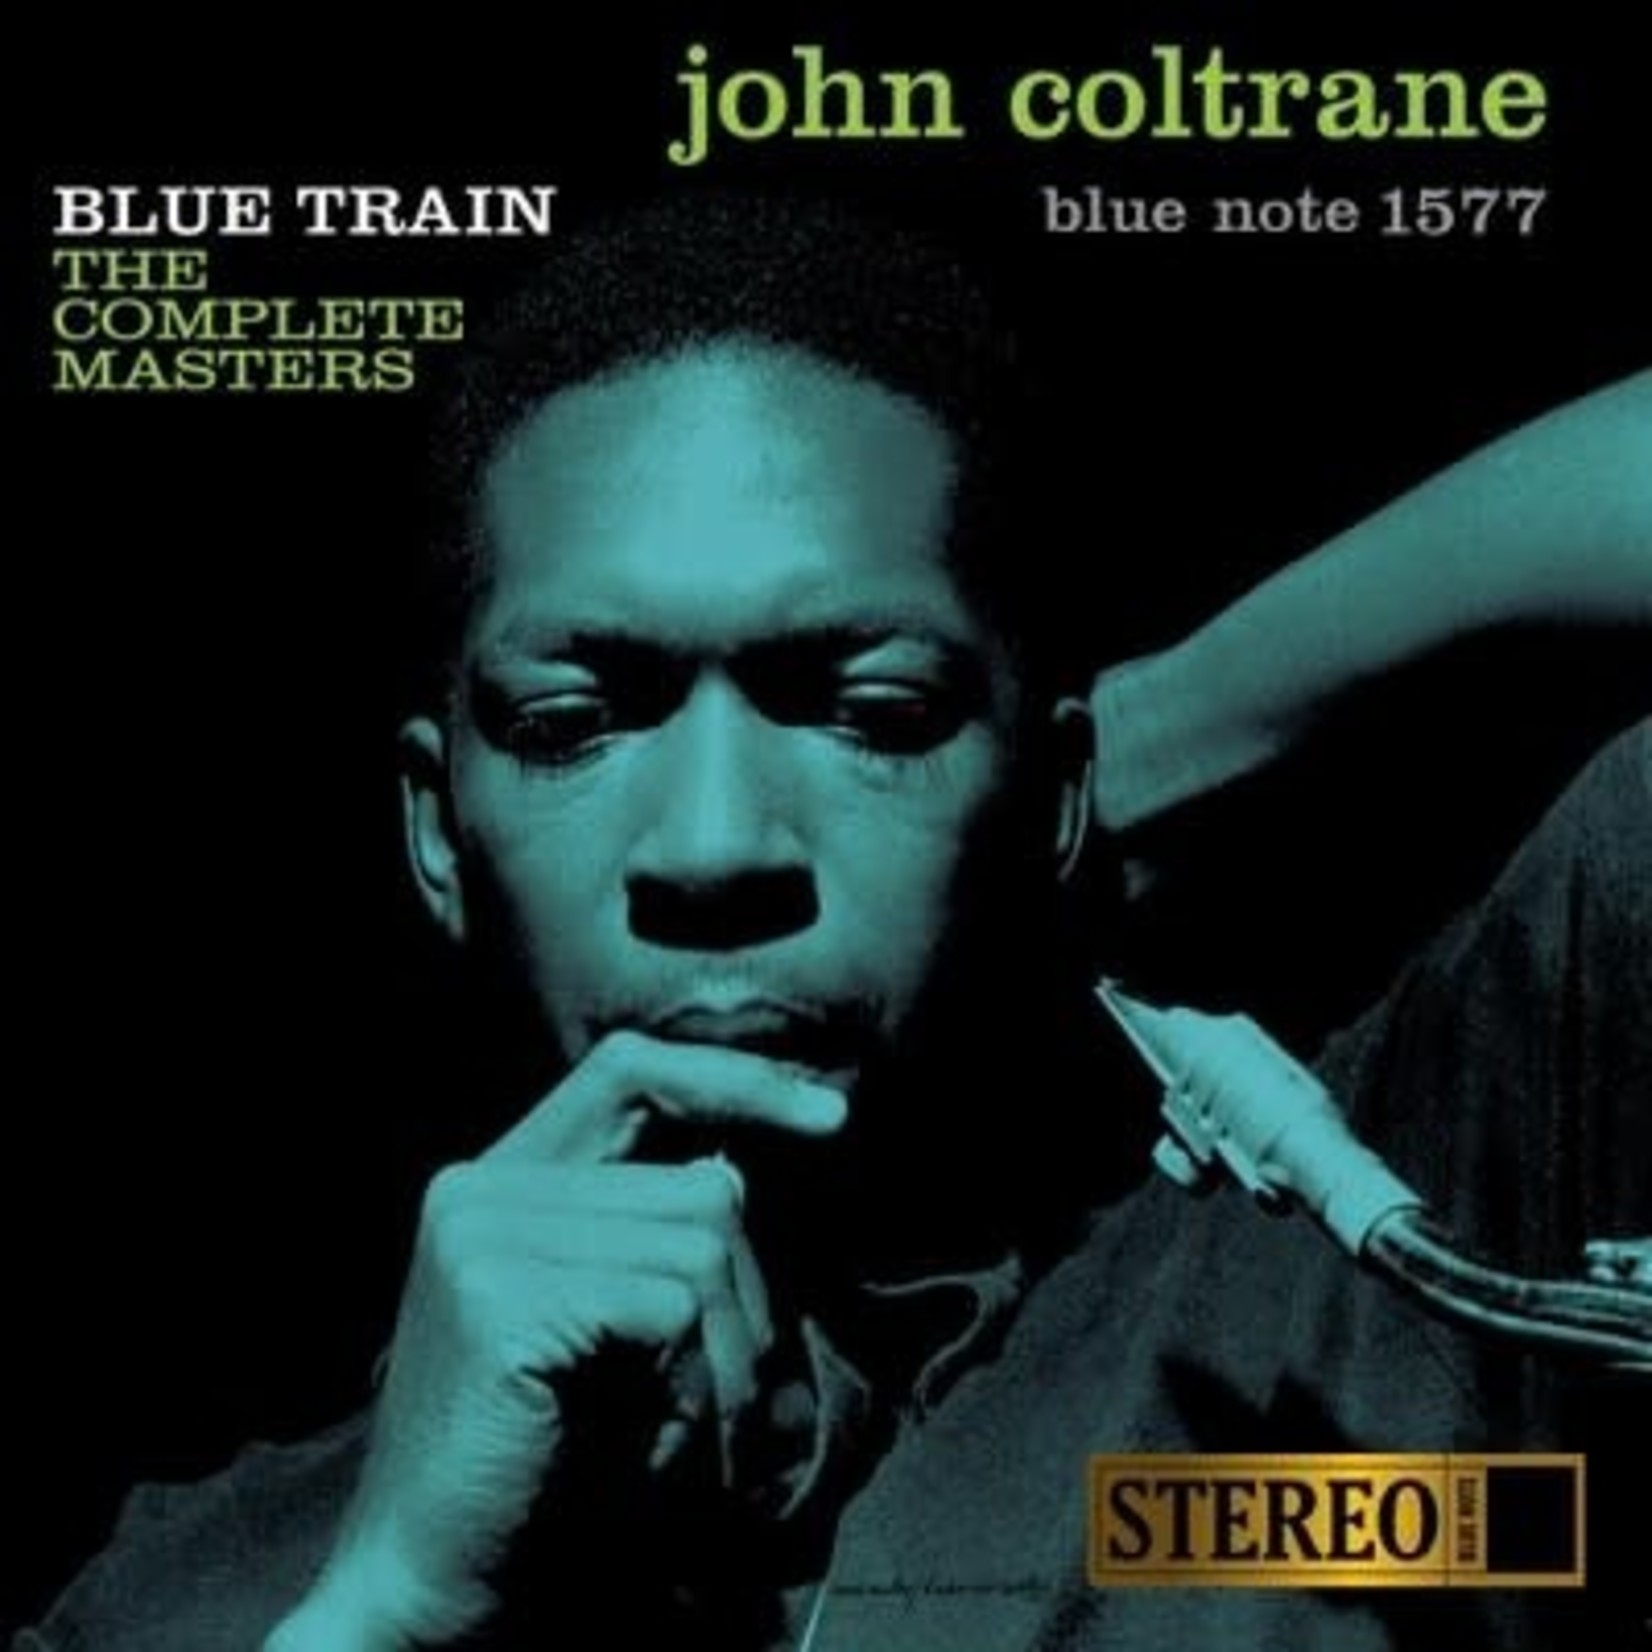 [New] John Coltrane - Blue Train: The Complete Masters (2LP, stereo, Blue Note Tone Poet series)